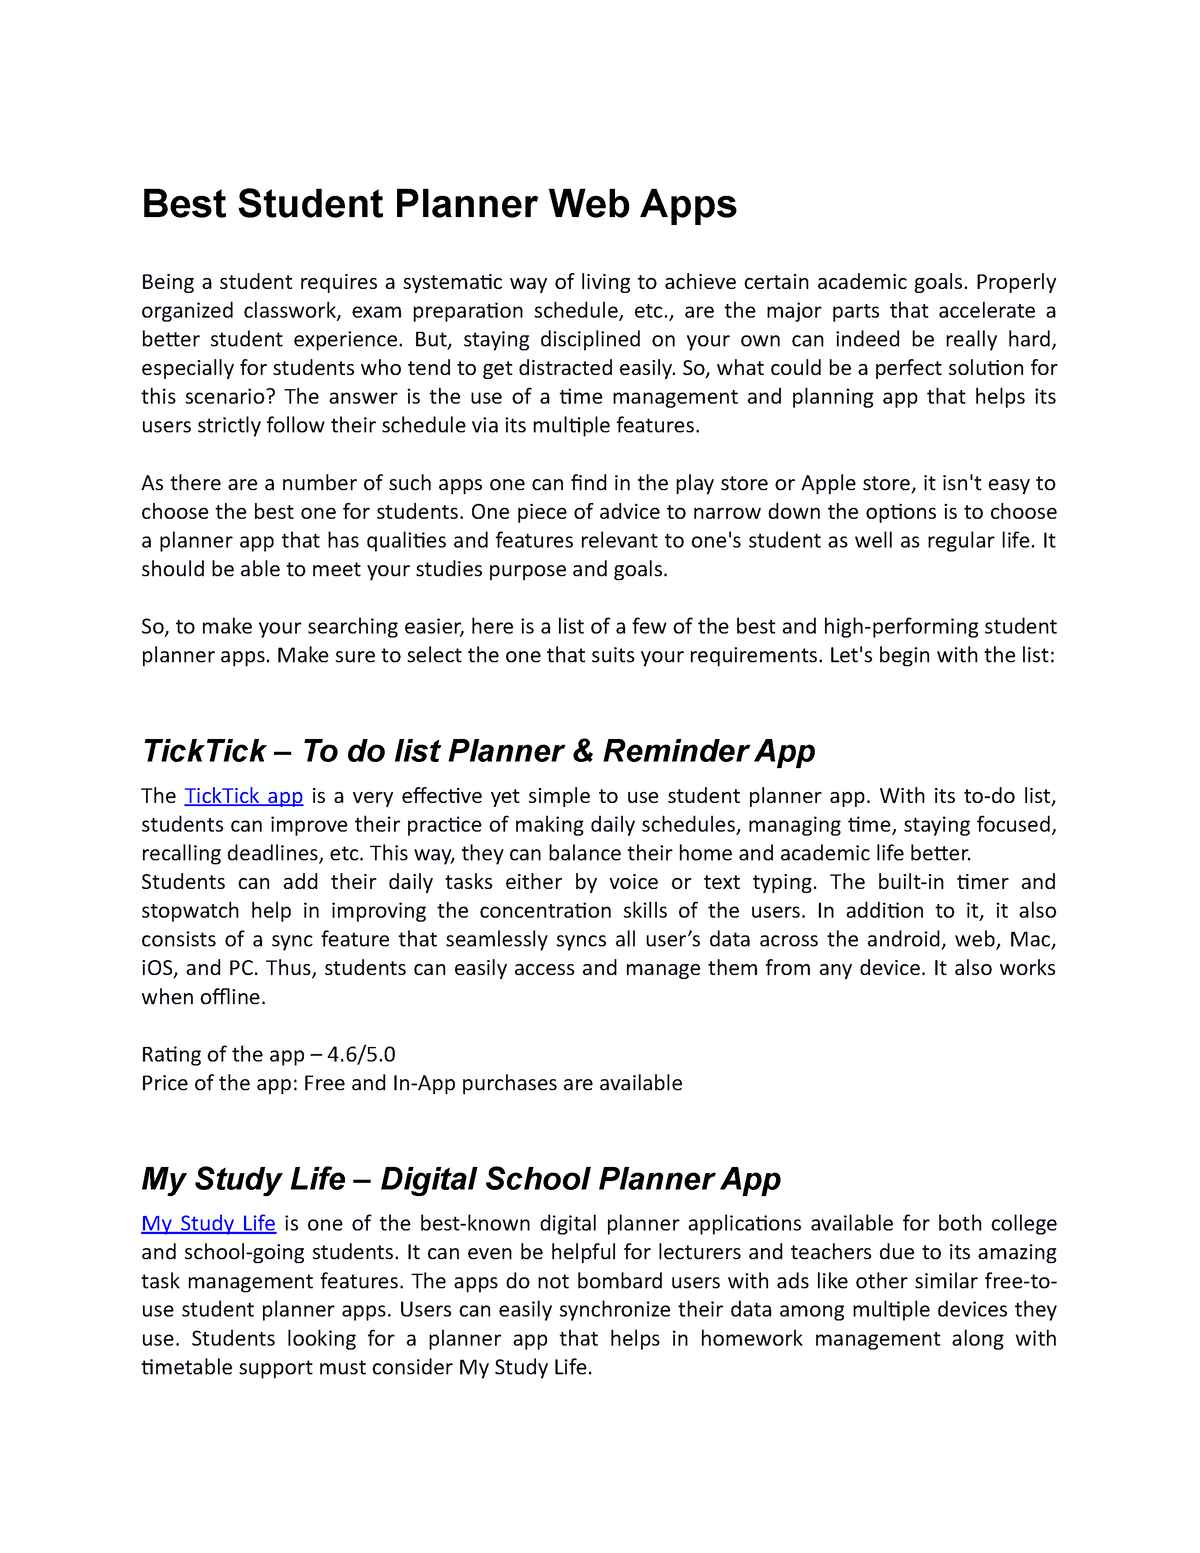 best-student-planner-apps-best-student-planner-web-apps-being-a